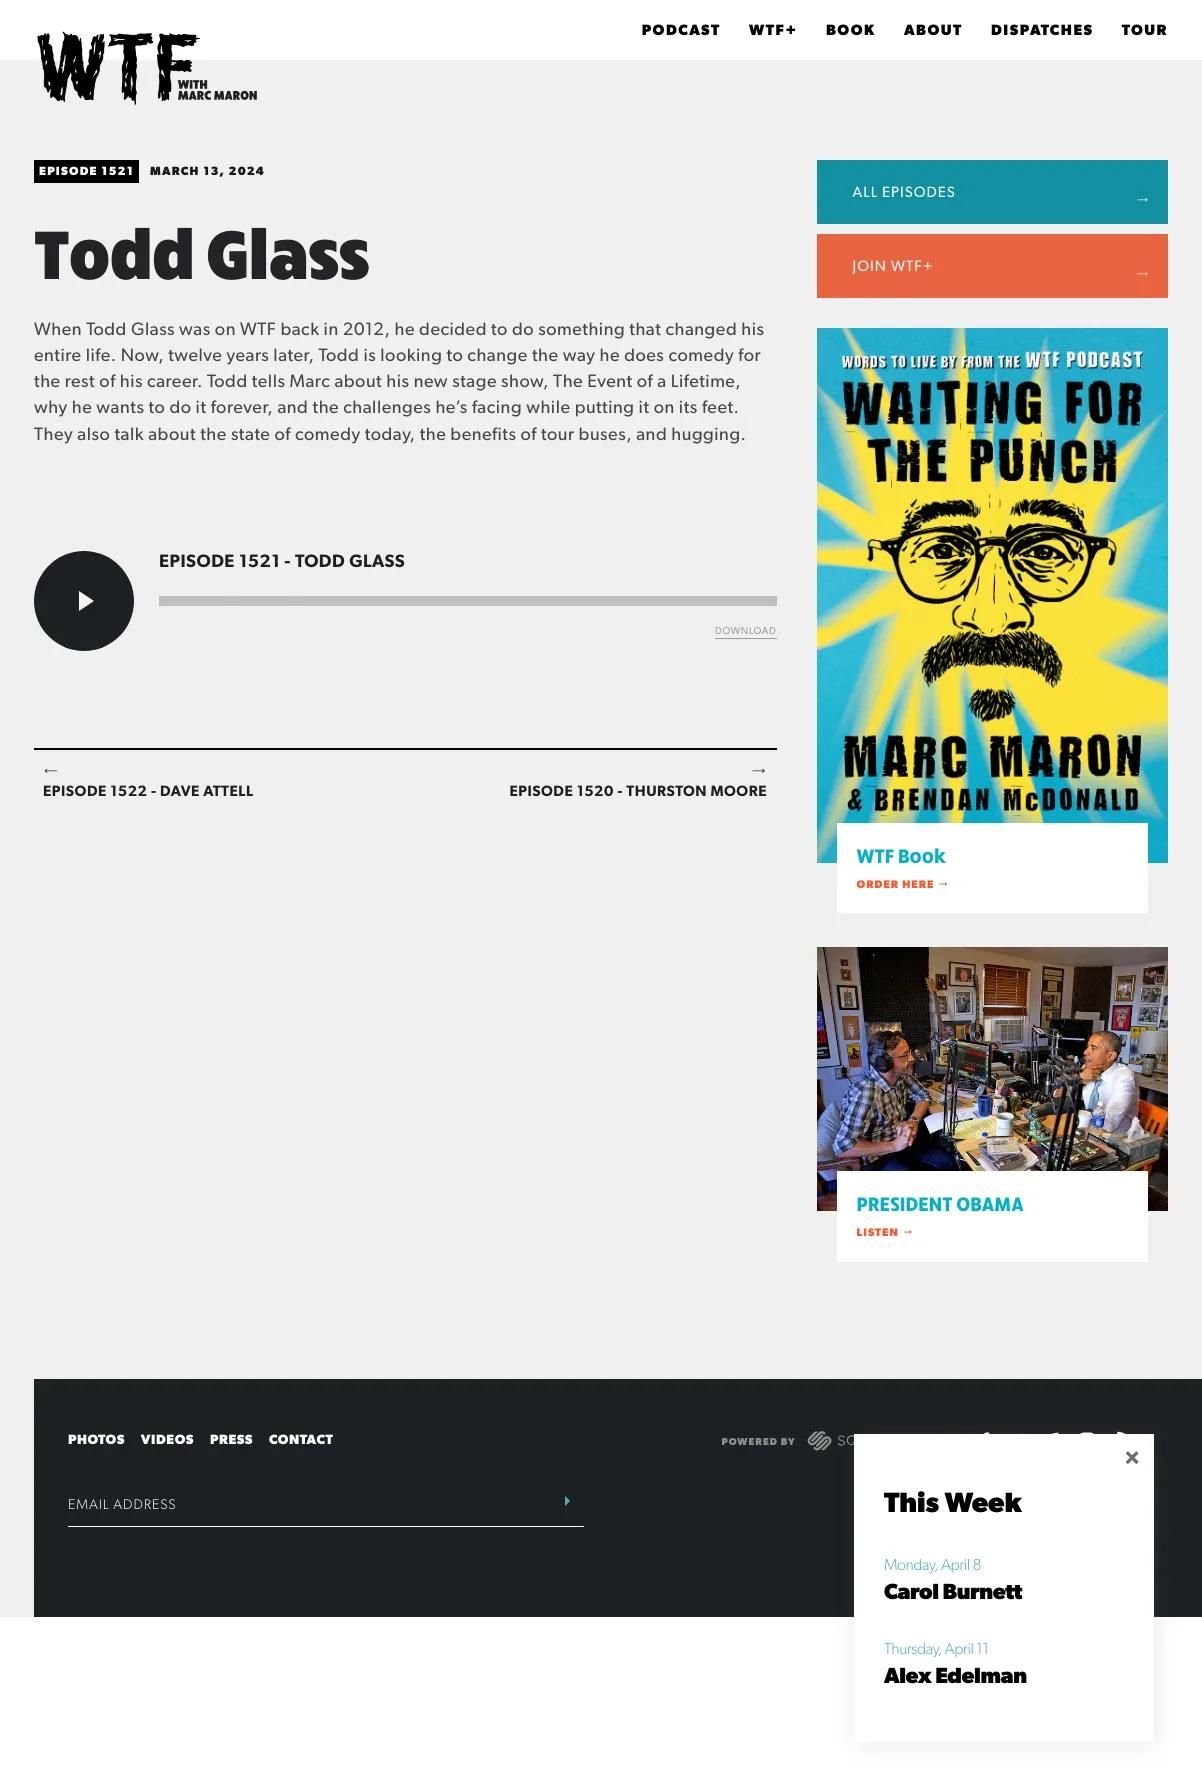 Screenshot 3 of WTF With Marc Maron (Example Squarespace Podcast Website)